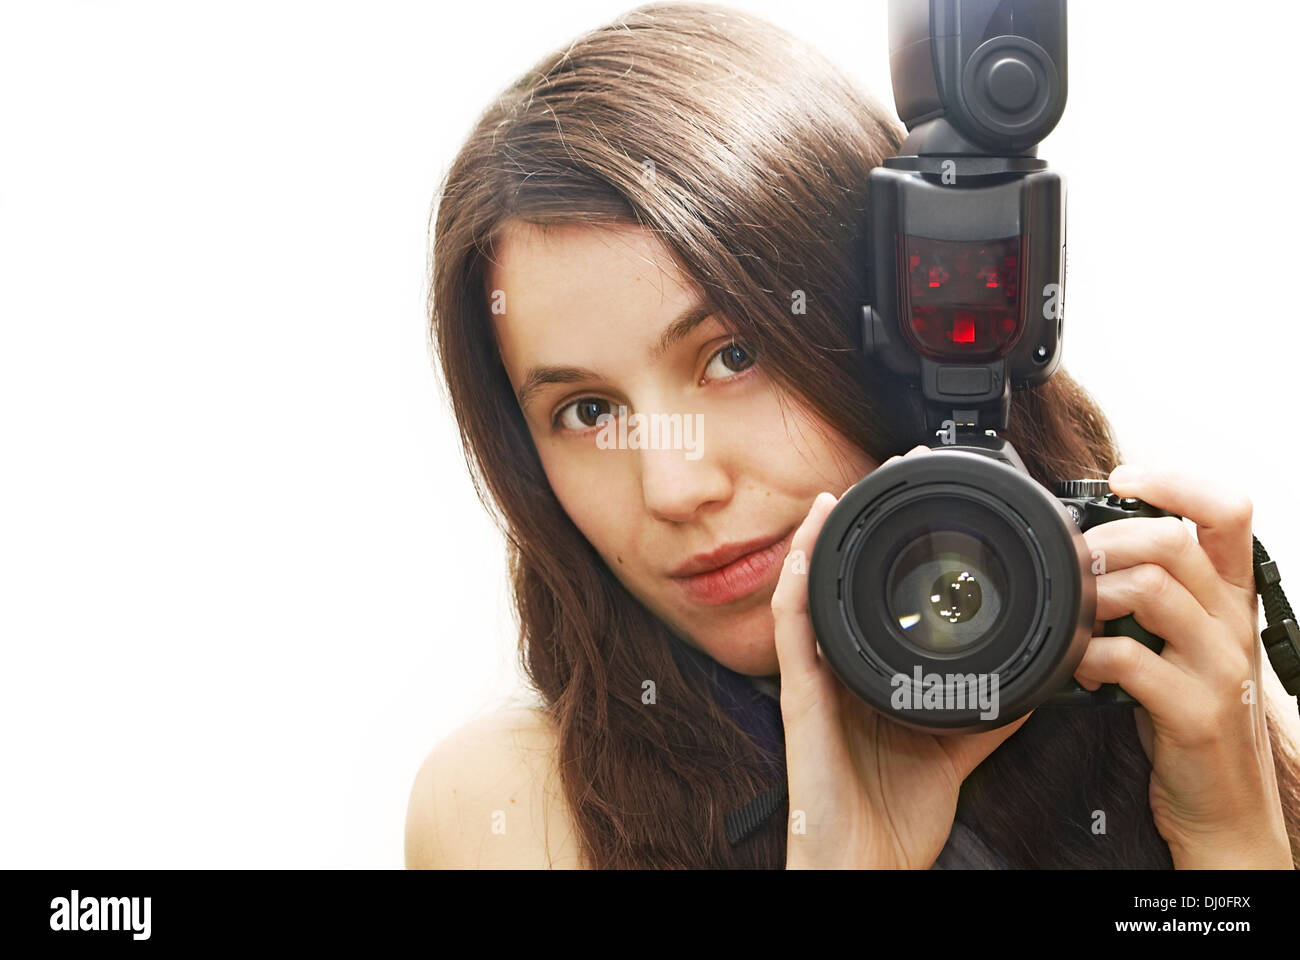 Self portrait with a camera in my hands Stock Photo